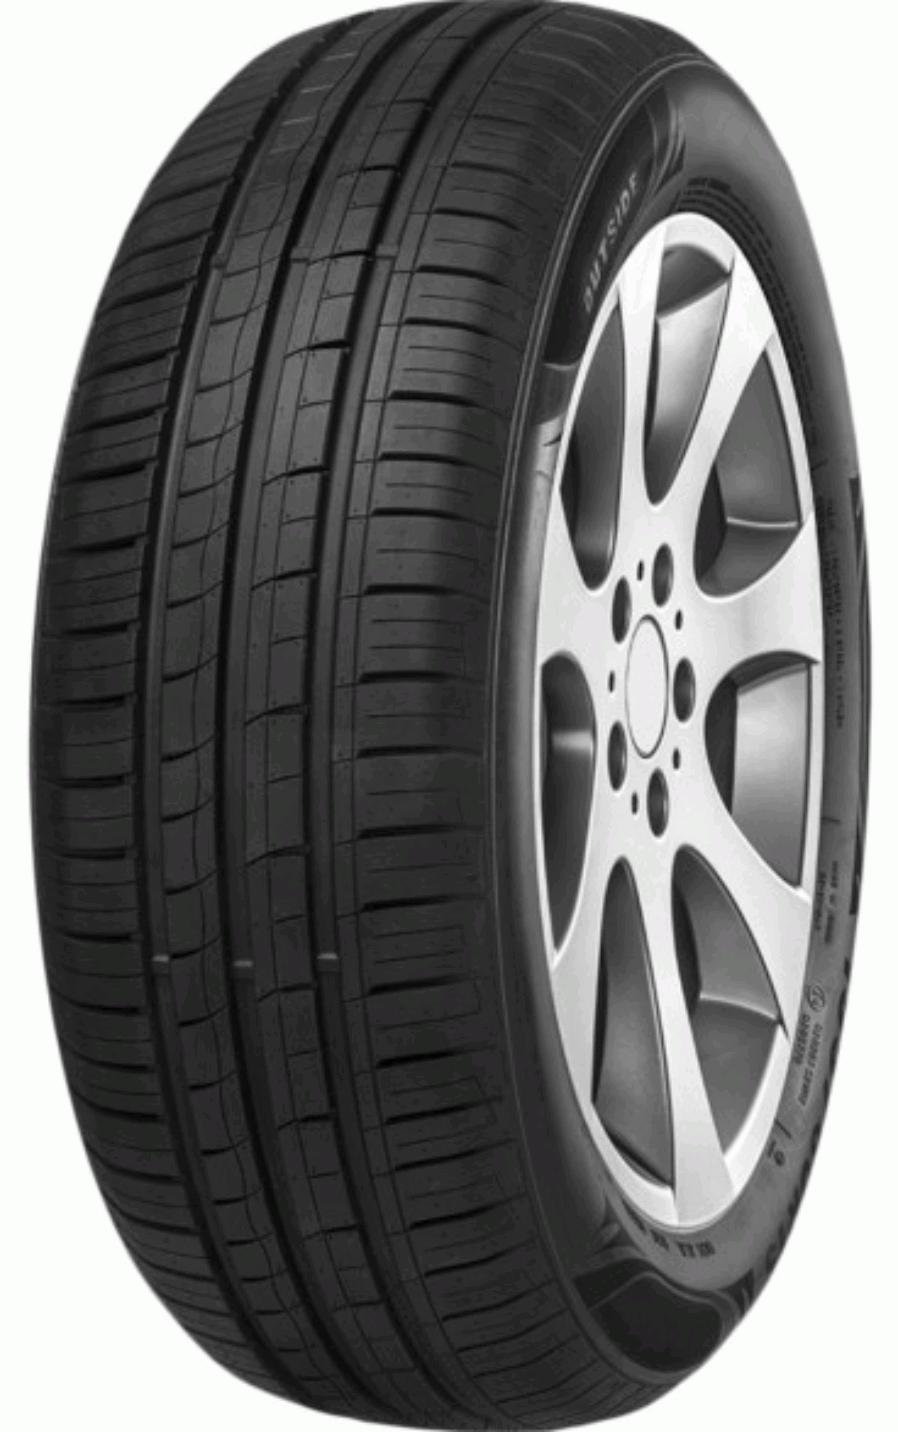 Imperial Ecodriver 4 - Tyre Reviews and Tests